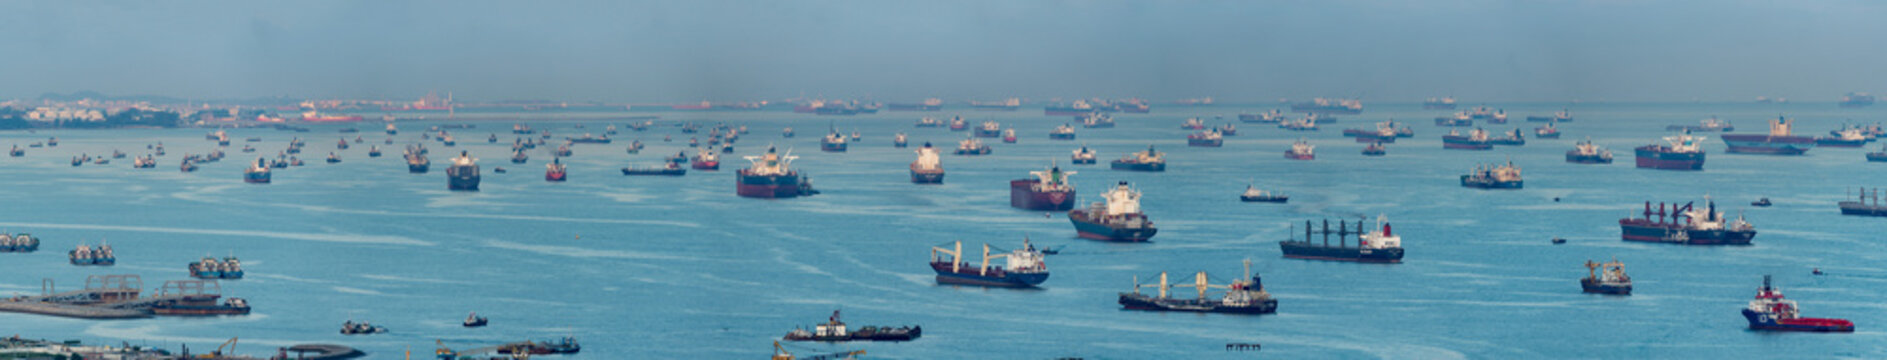 Wide panorama image of Container Ships and tankers anchored at the Singapore strait.